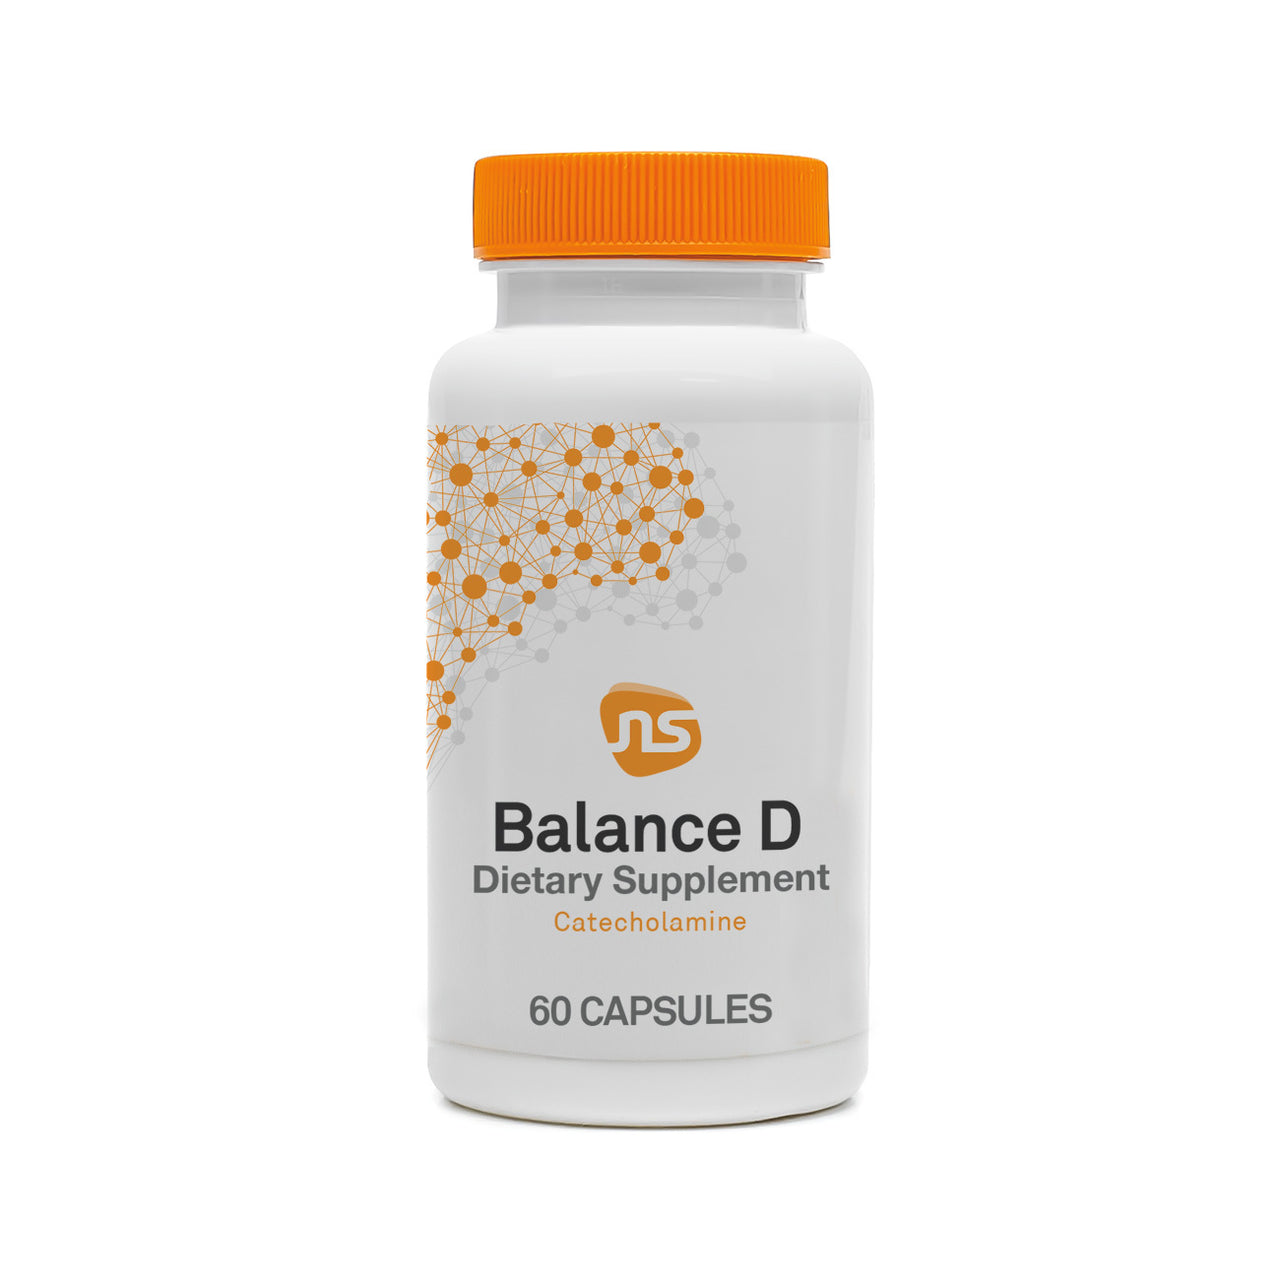 Balance D - Neuroscience Inc - Contains ingredients important for the synthesis of dopamine, important for positive affect, mood, cognition, and craving control